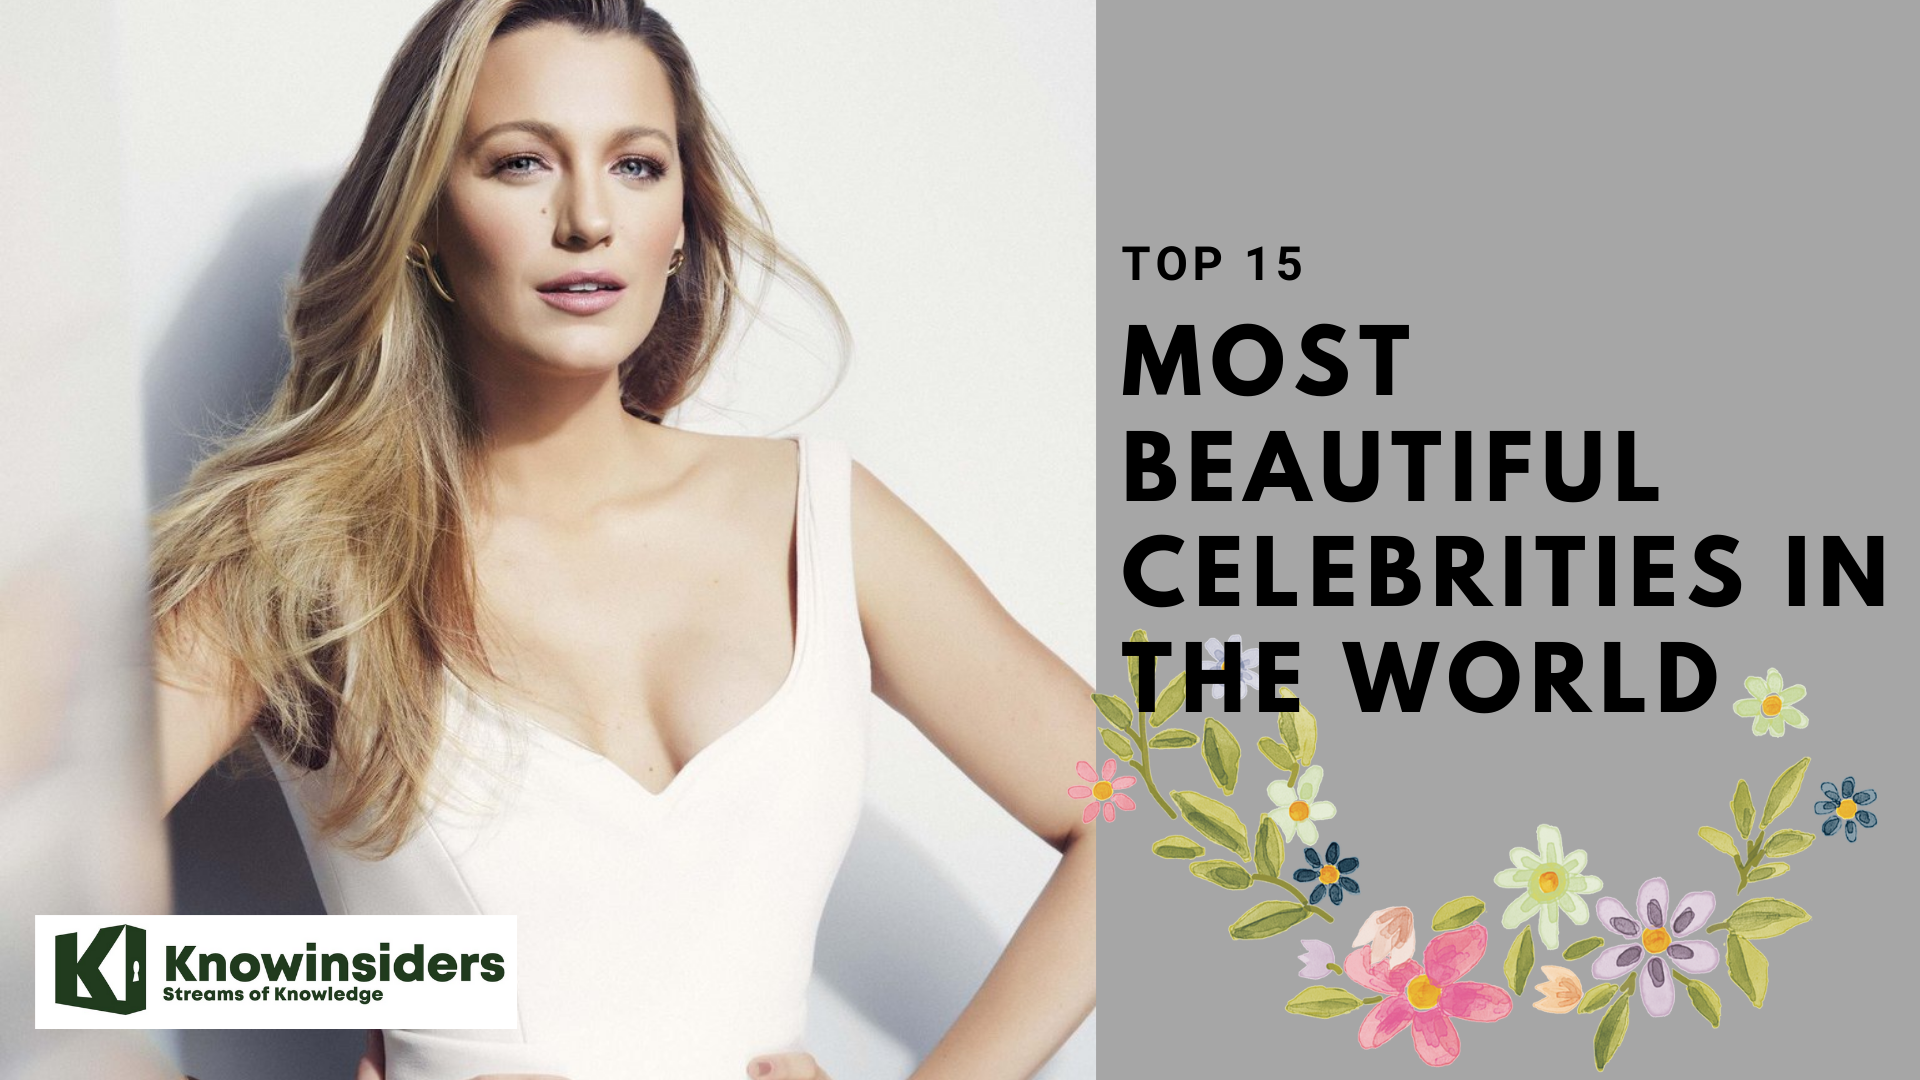 Top 15 Most Beautiful and Hottest Celebrities In The World